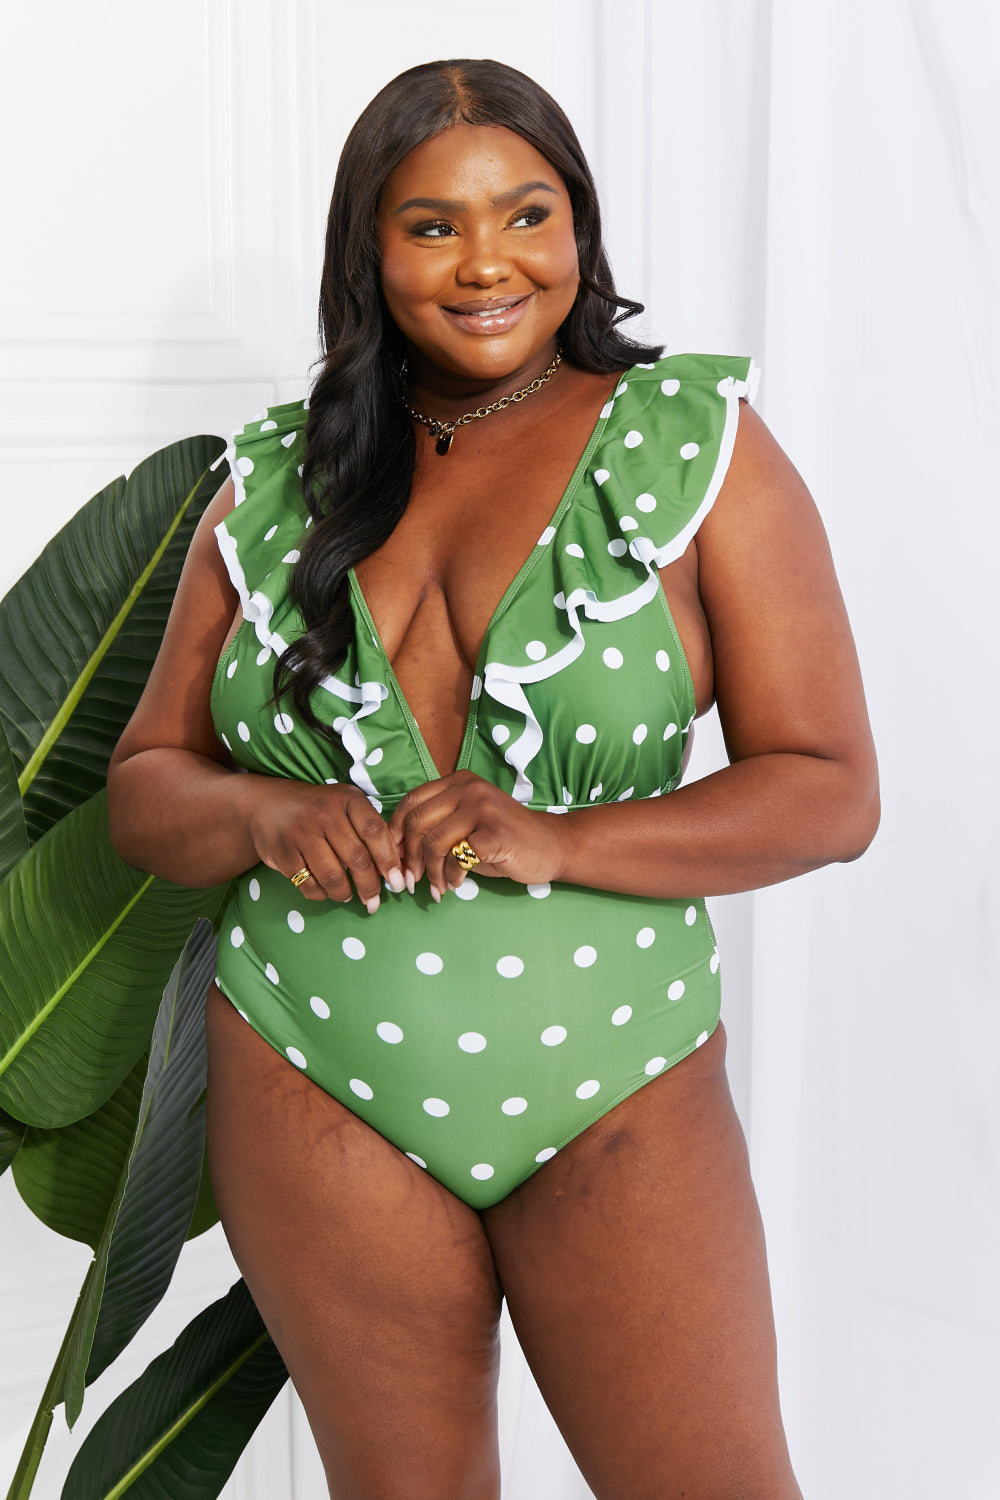 Marina West Swim Moonlit Dip Ruffle Plunge Swimsuit in Mid Green Print on any thing USA/STOD clothes